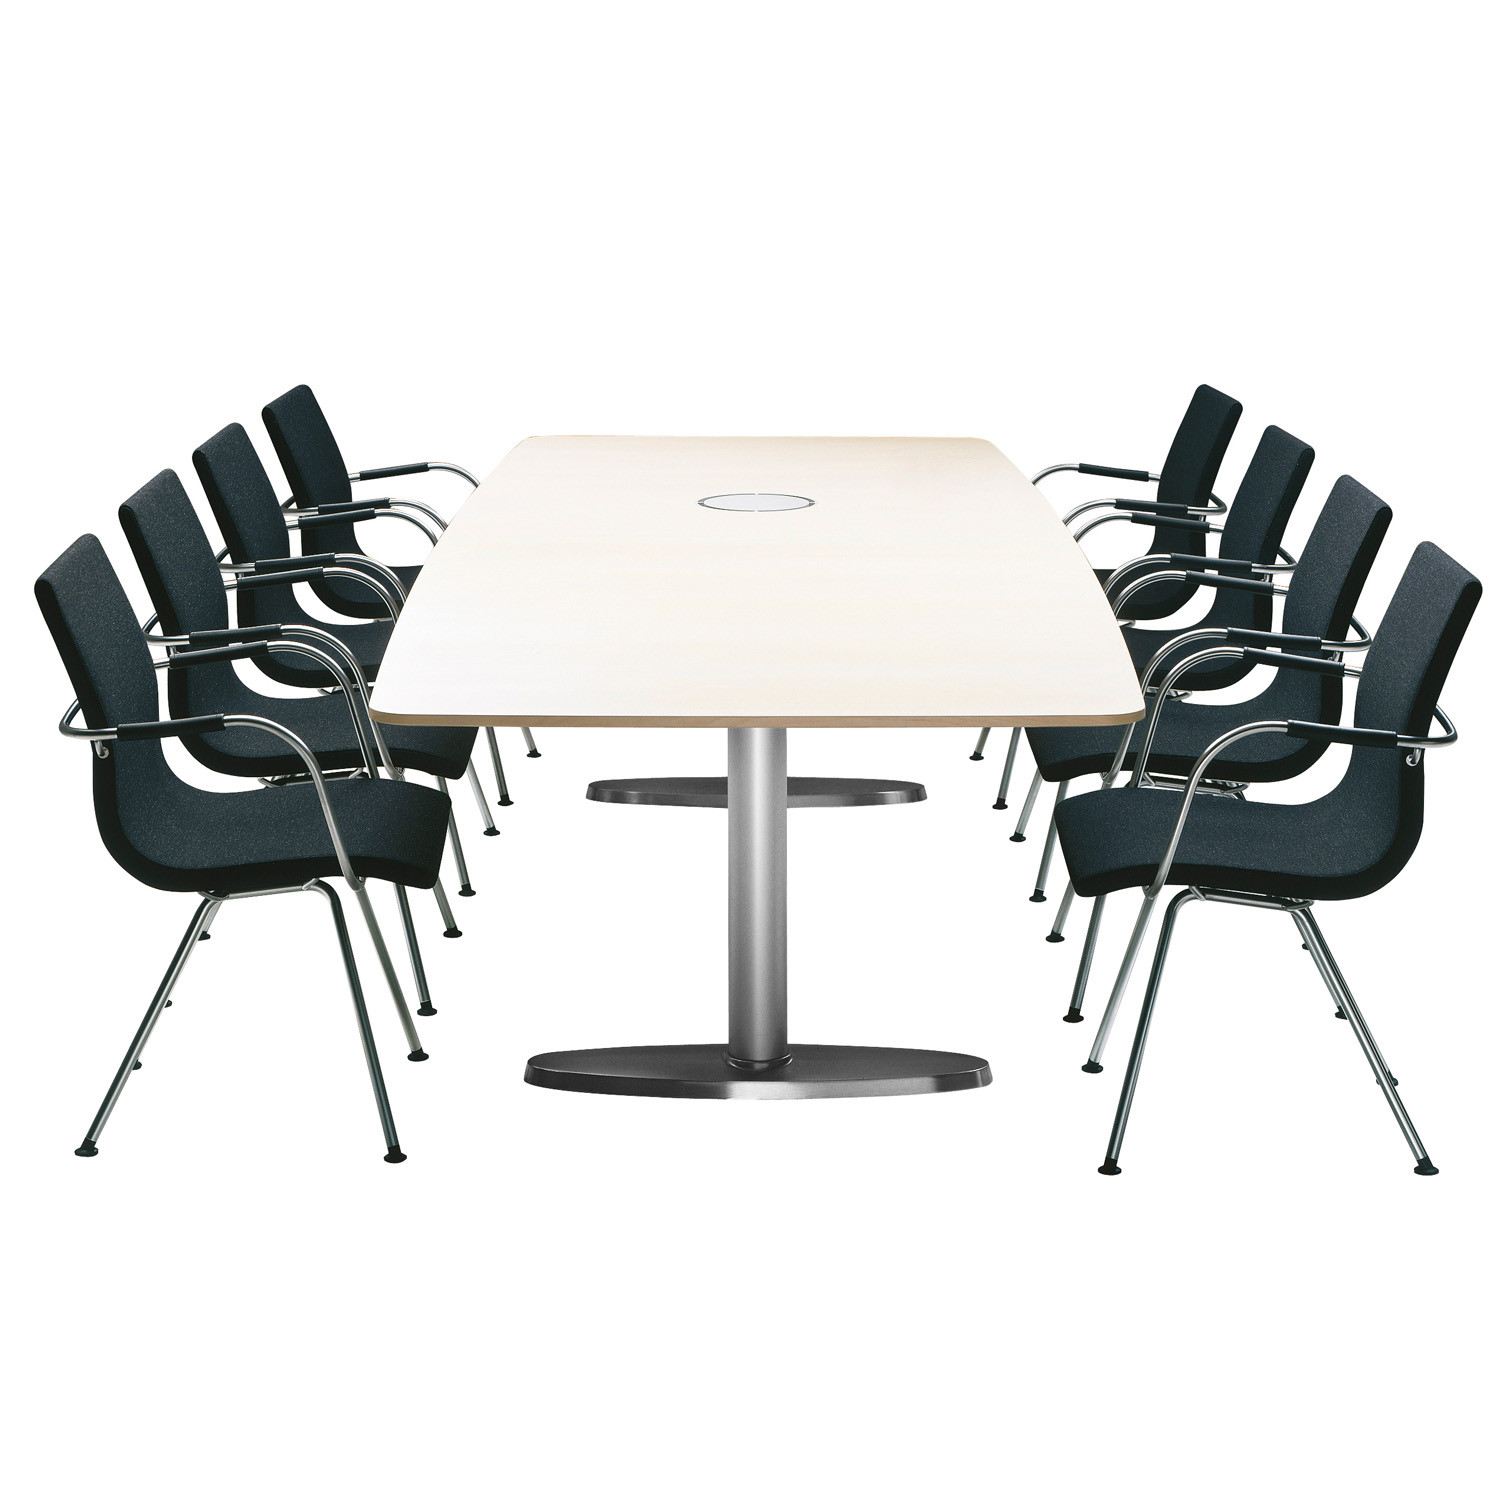 Atlas conference table